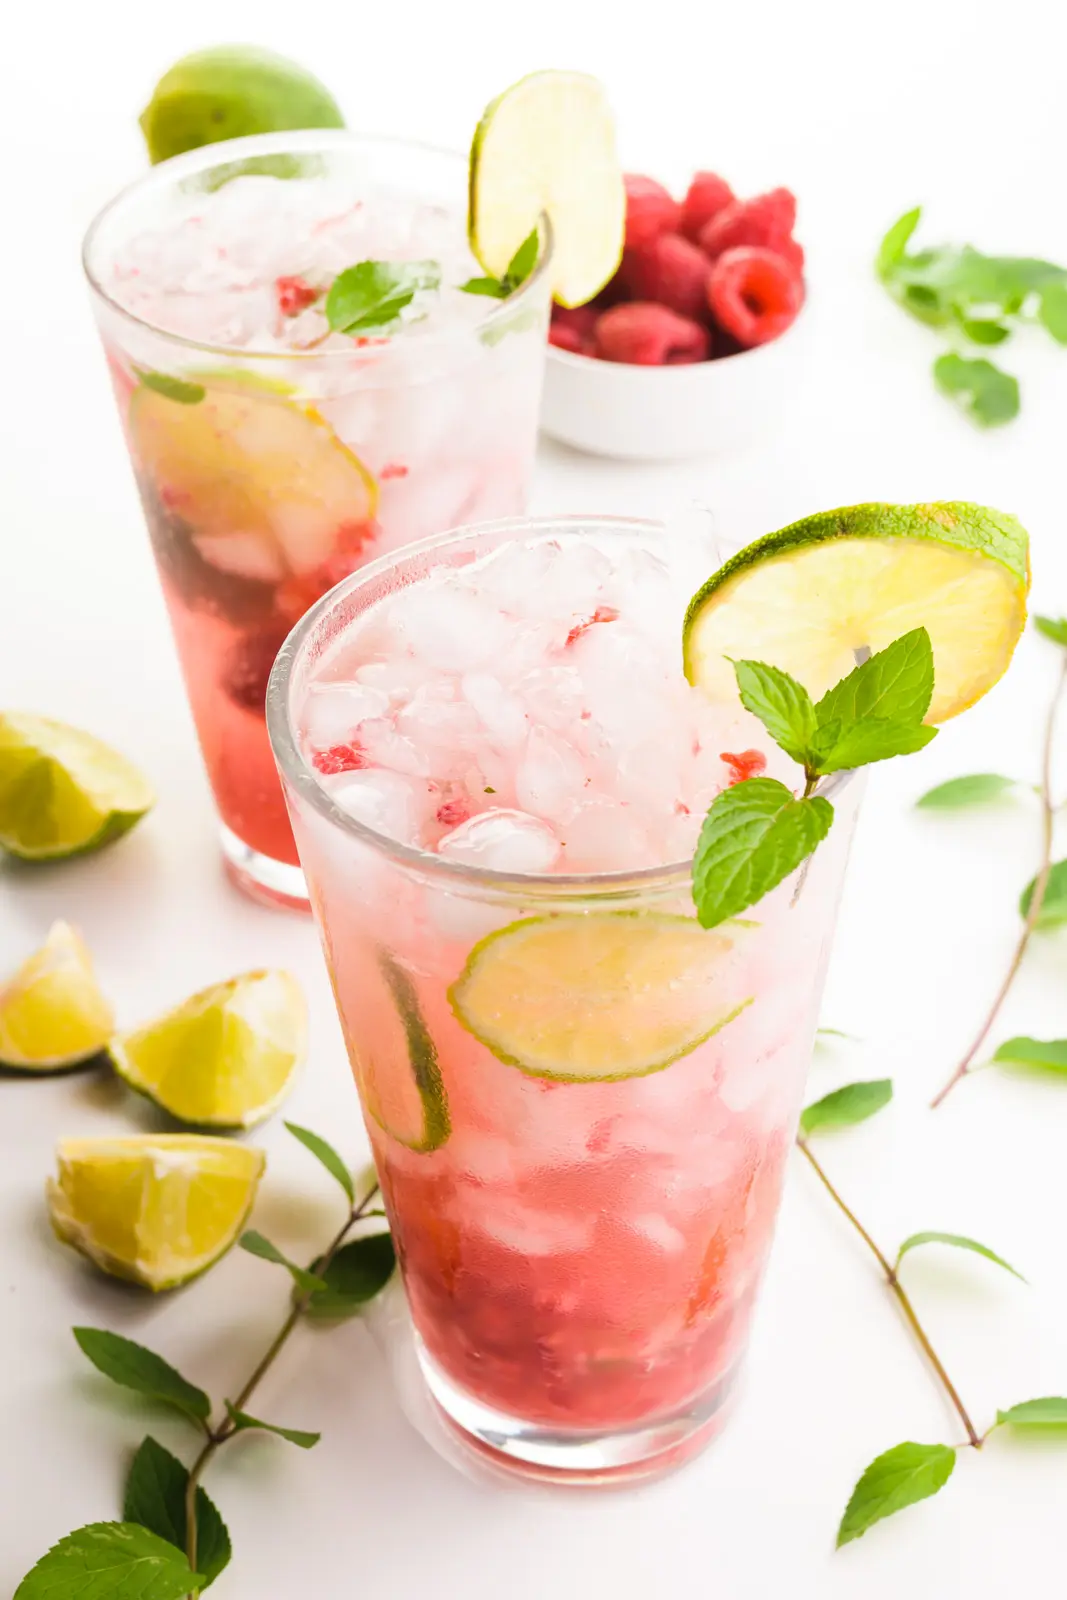 Two tall glasses full of raspberry mojitos have lime wedges as garnishes. There are mint sprigs, limes, and raspberries around the glasses.